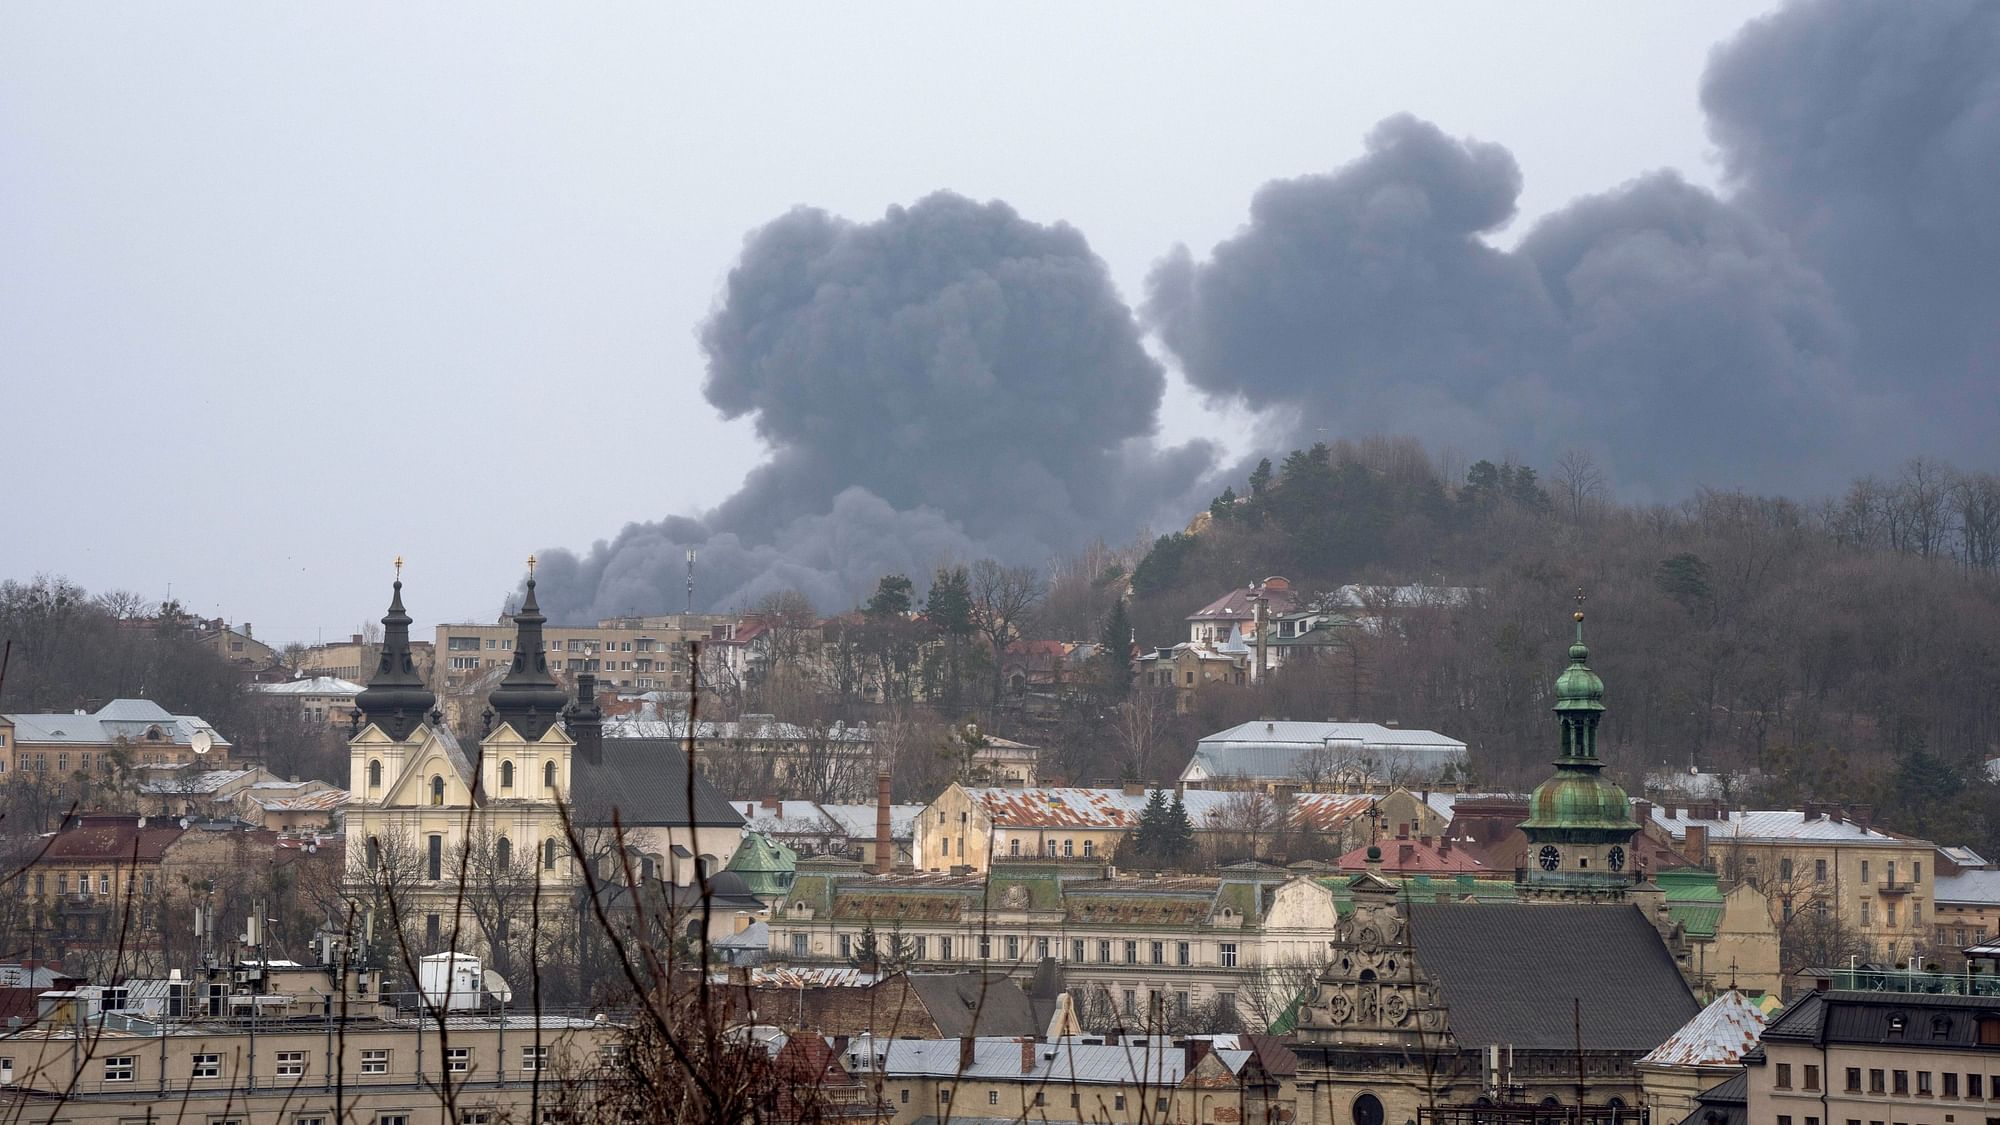 <div class="paragraphs"><p>Smoke rises in the air in Lviv, western Ukraine as Russia continues to strike and encircle urban populations, from Chernihiv and Kharkiv in the north to Mariupol in the south.</p></div>